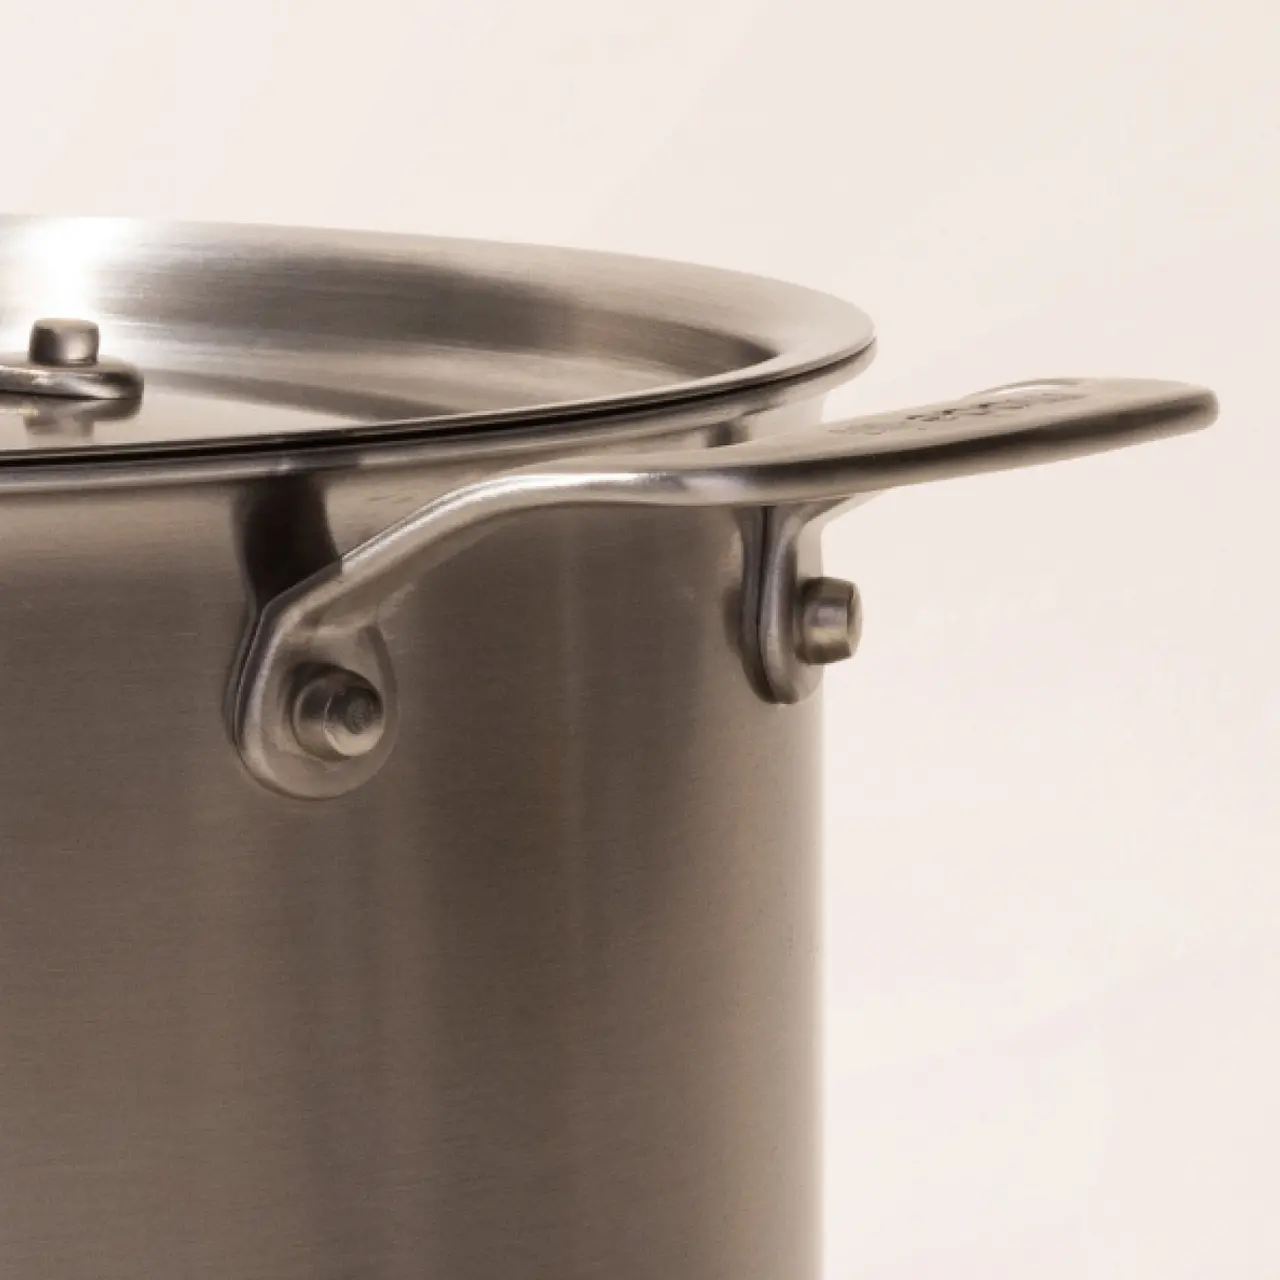 8qt Ceramic Non-Stick Coated Aluminum Stock Pot with Lid - Made By Design™